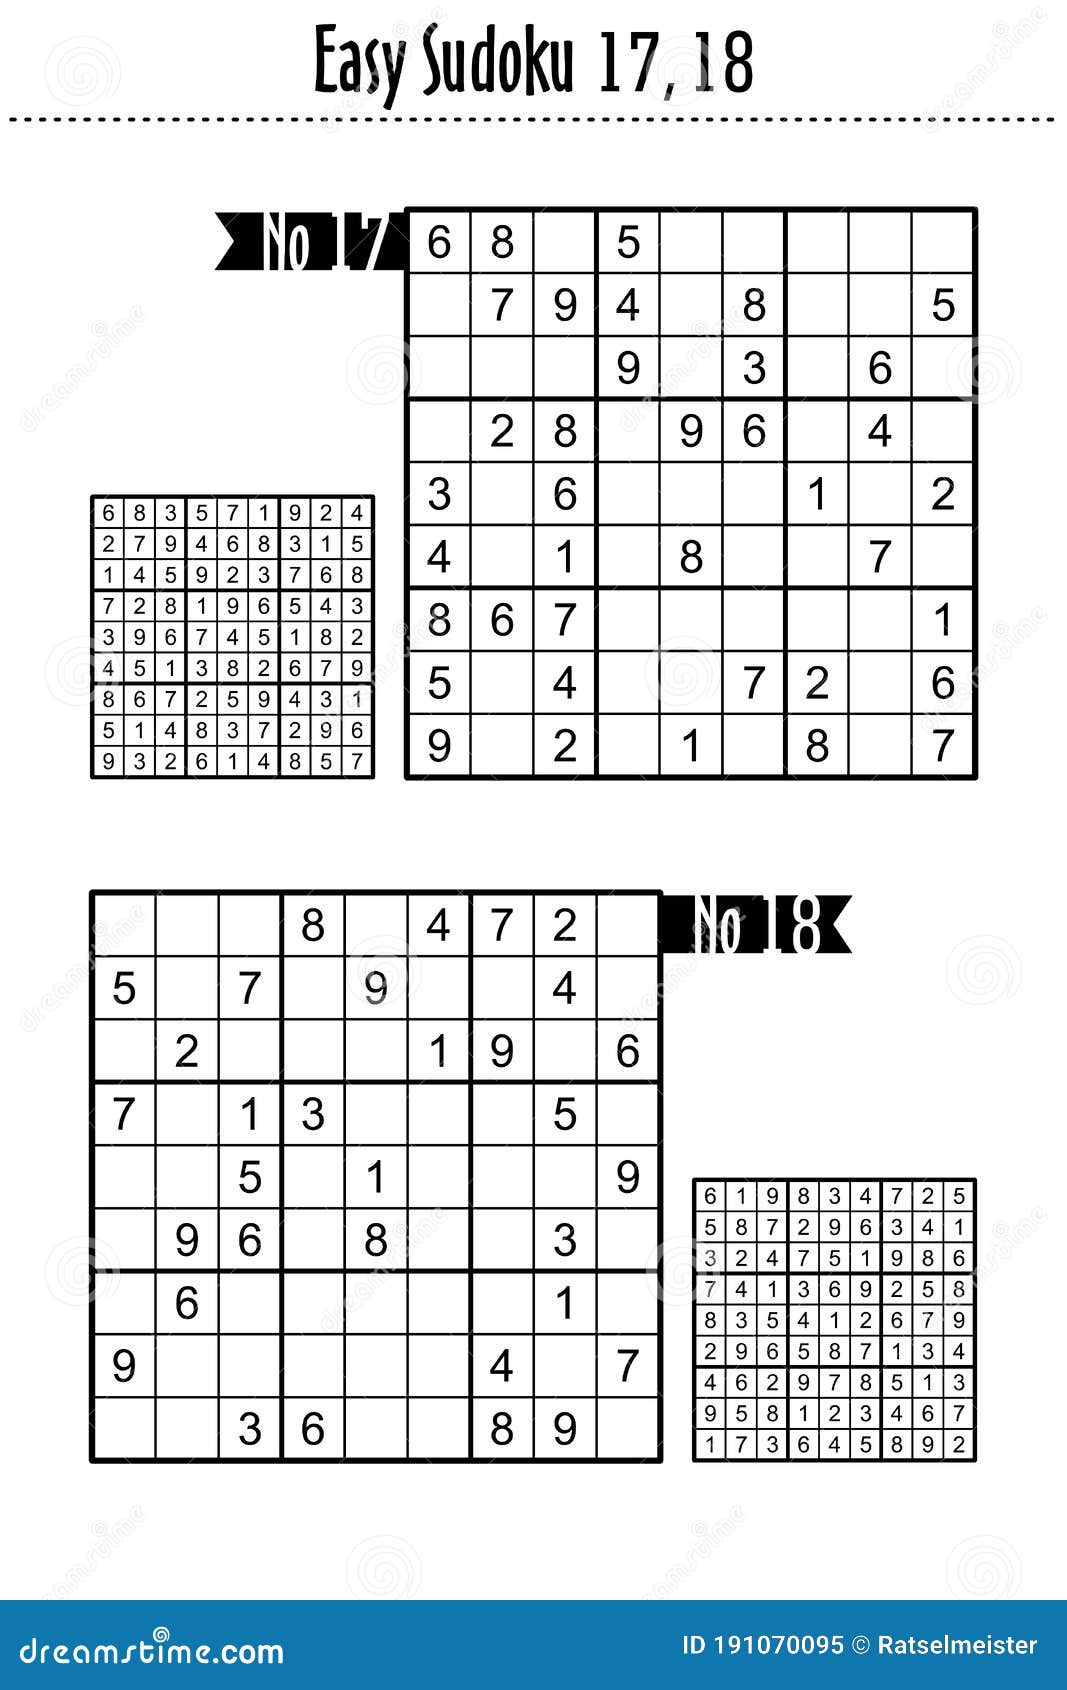 two easy level sudoku puzzles, no 17 and no 18